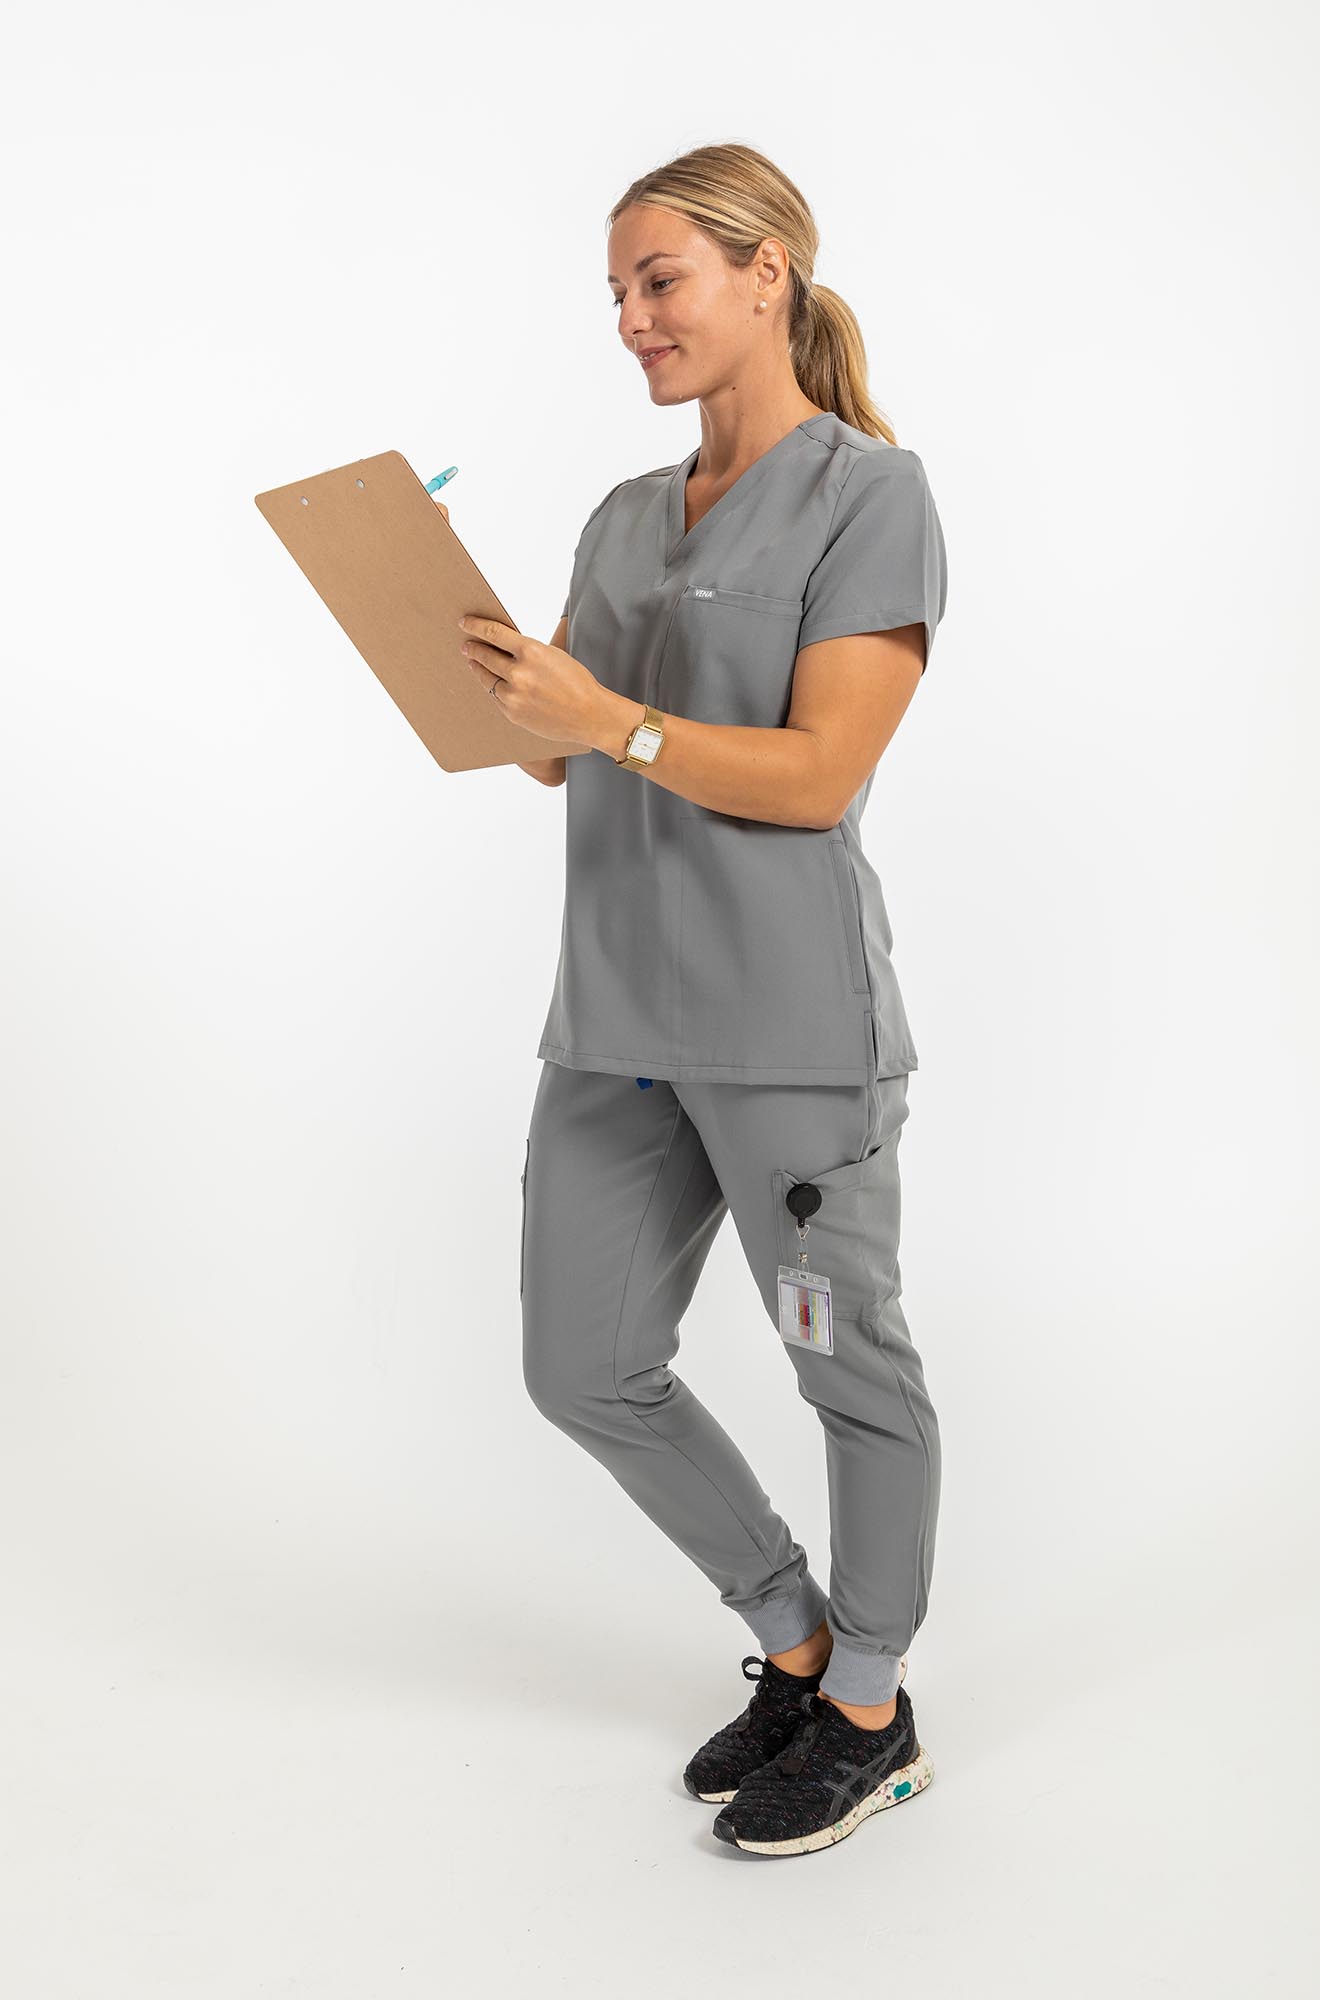 Vena ladies jogger style scrub pants lady with checklist on her hand#colour_grey